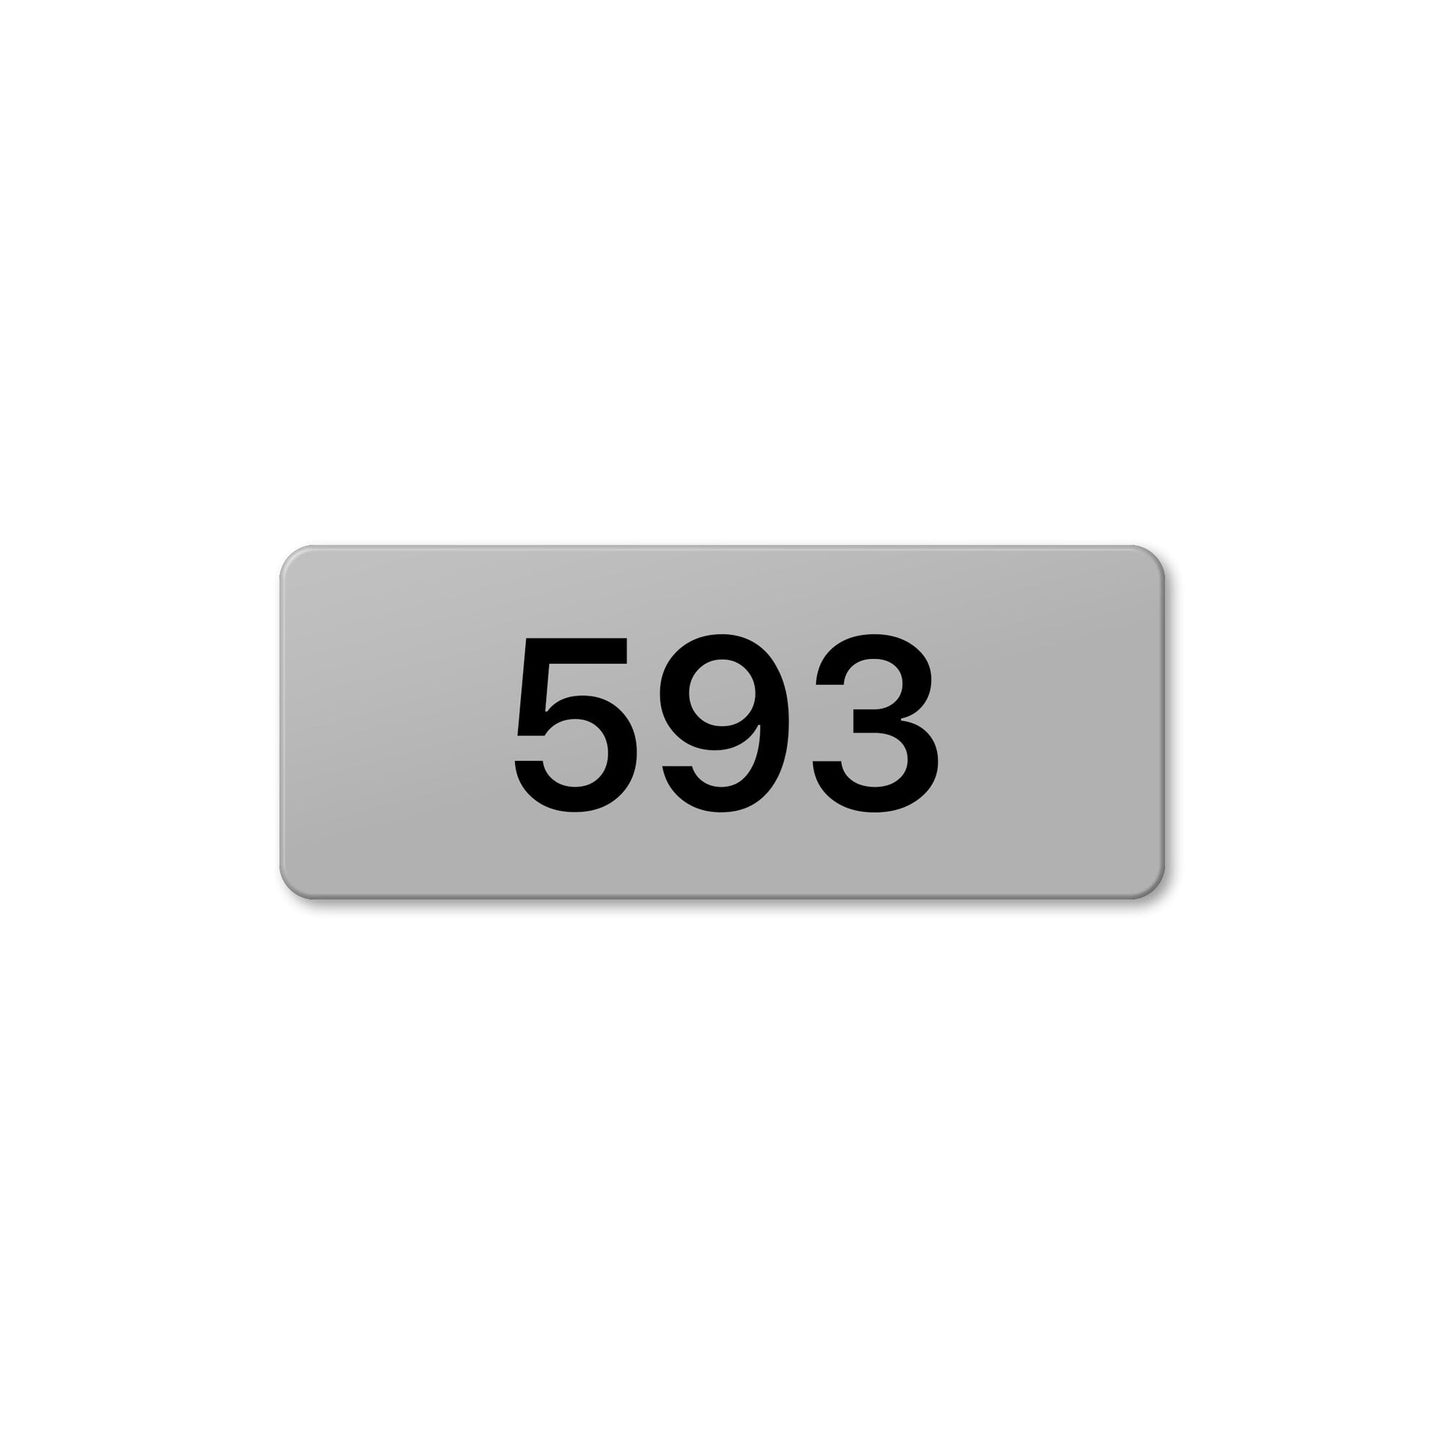 Numeral 593